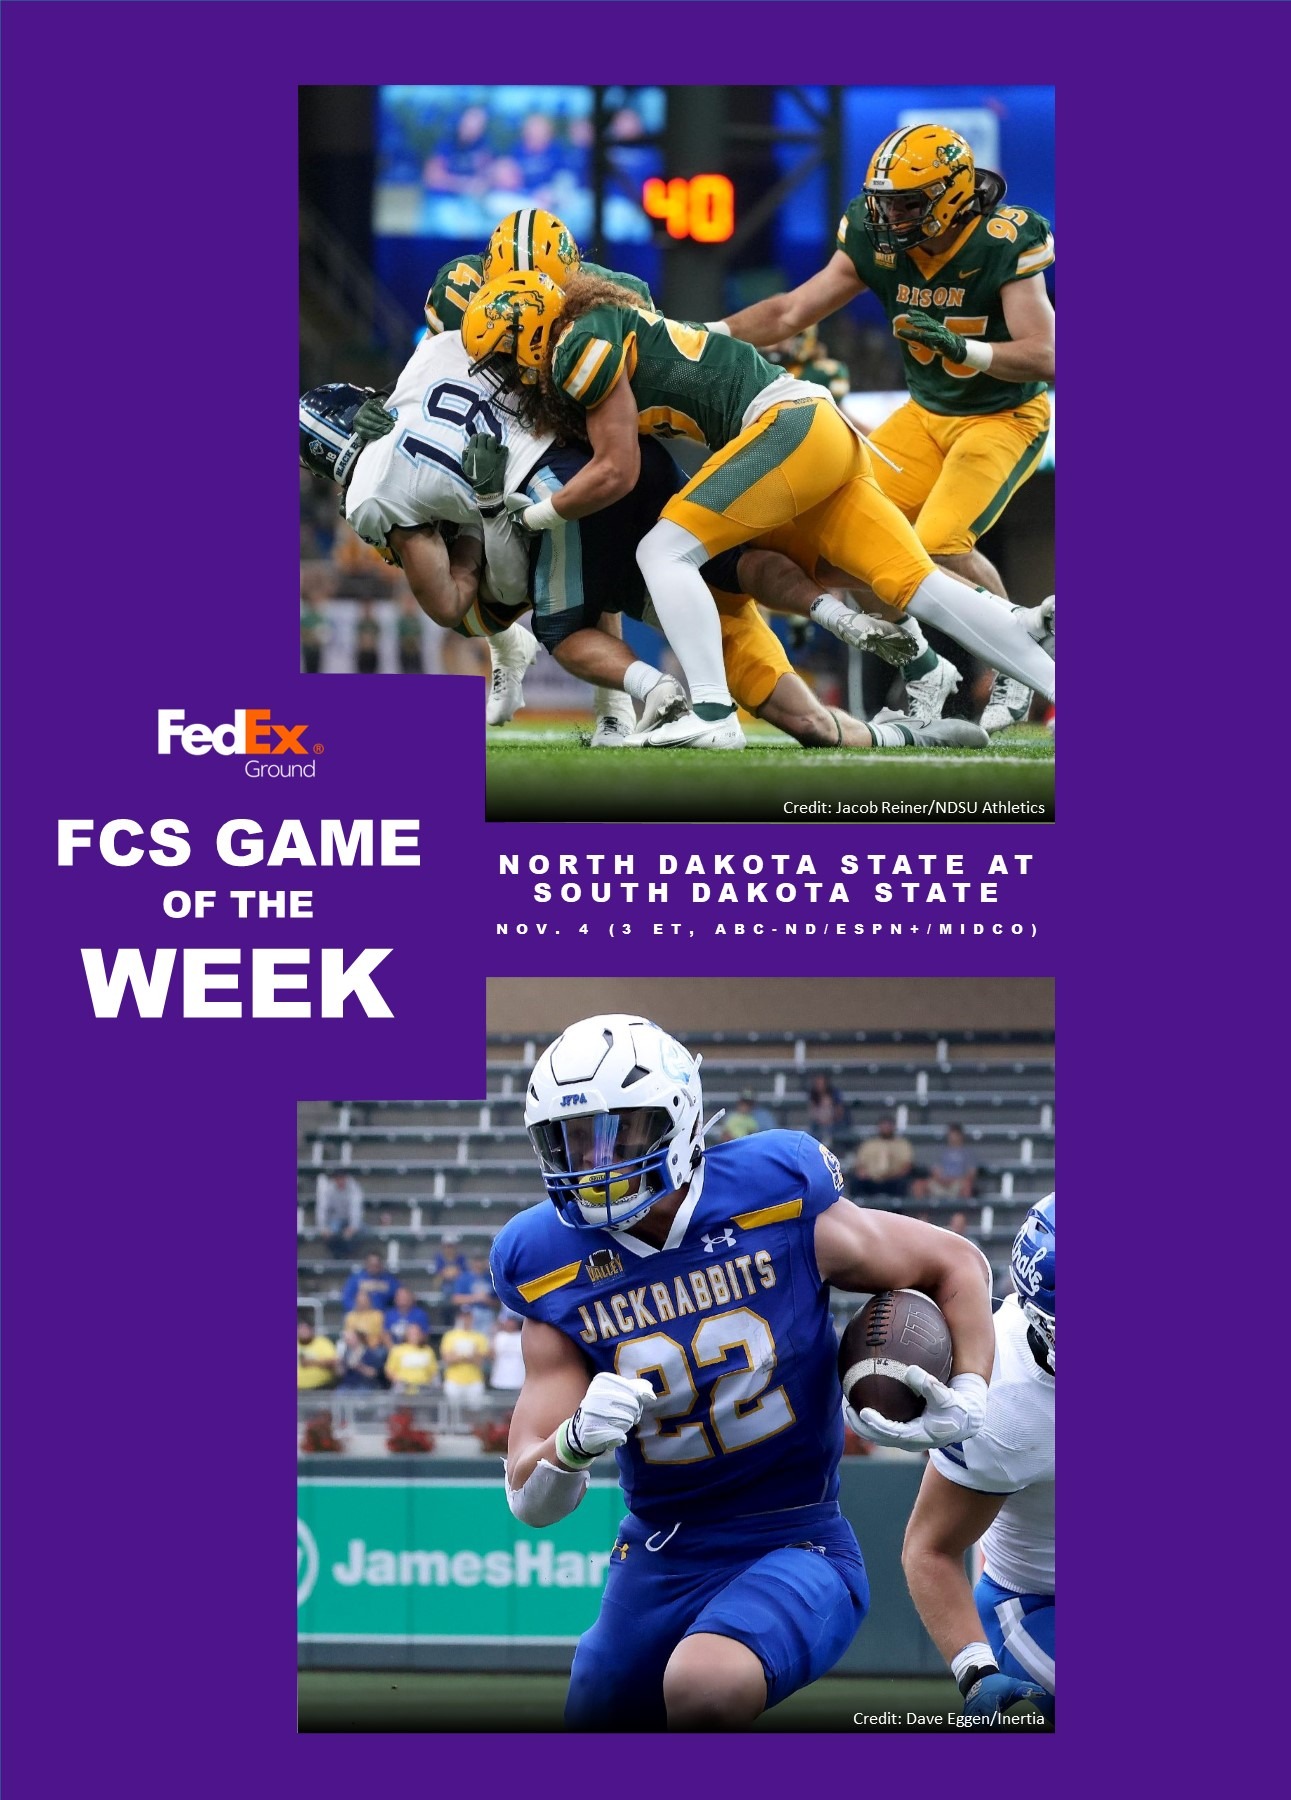 Fcs Football Week 10 Preview And Predictions The Analyst 4415